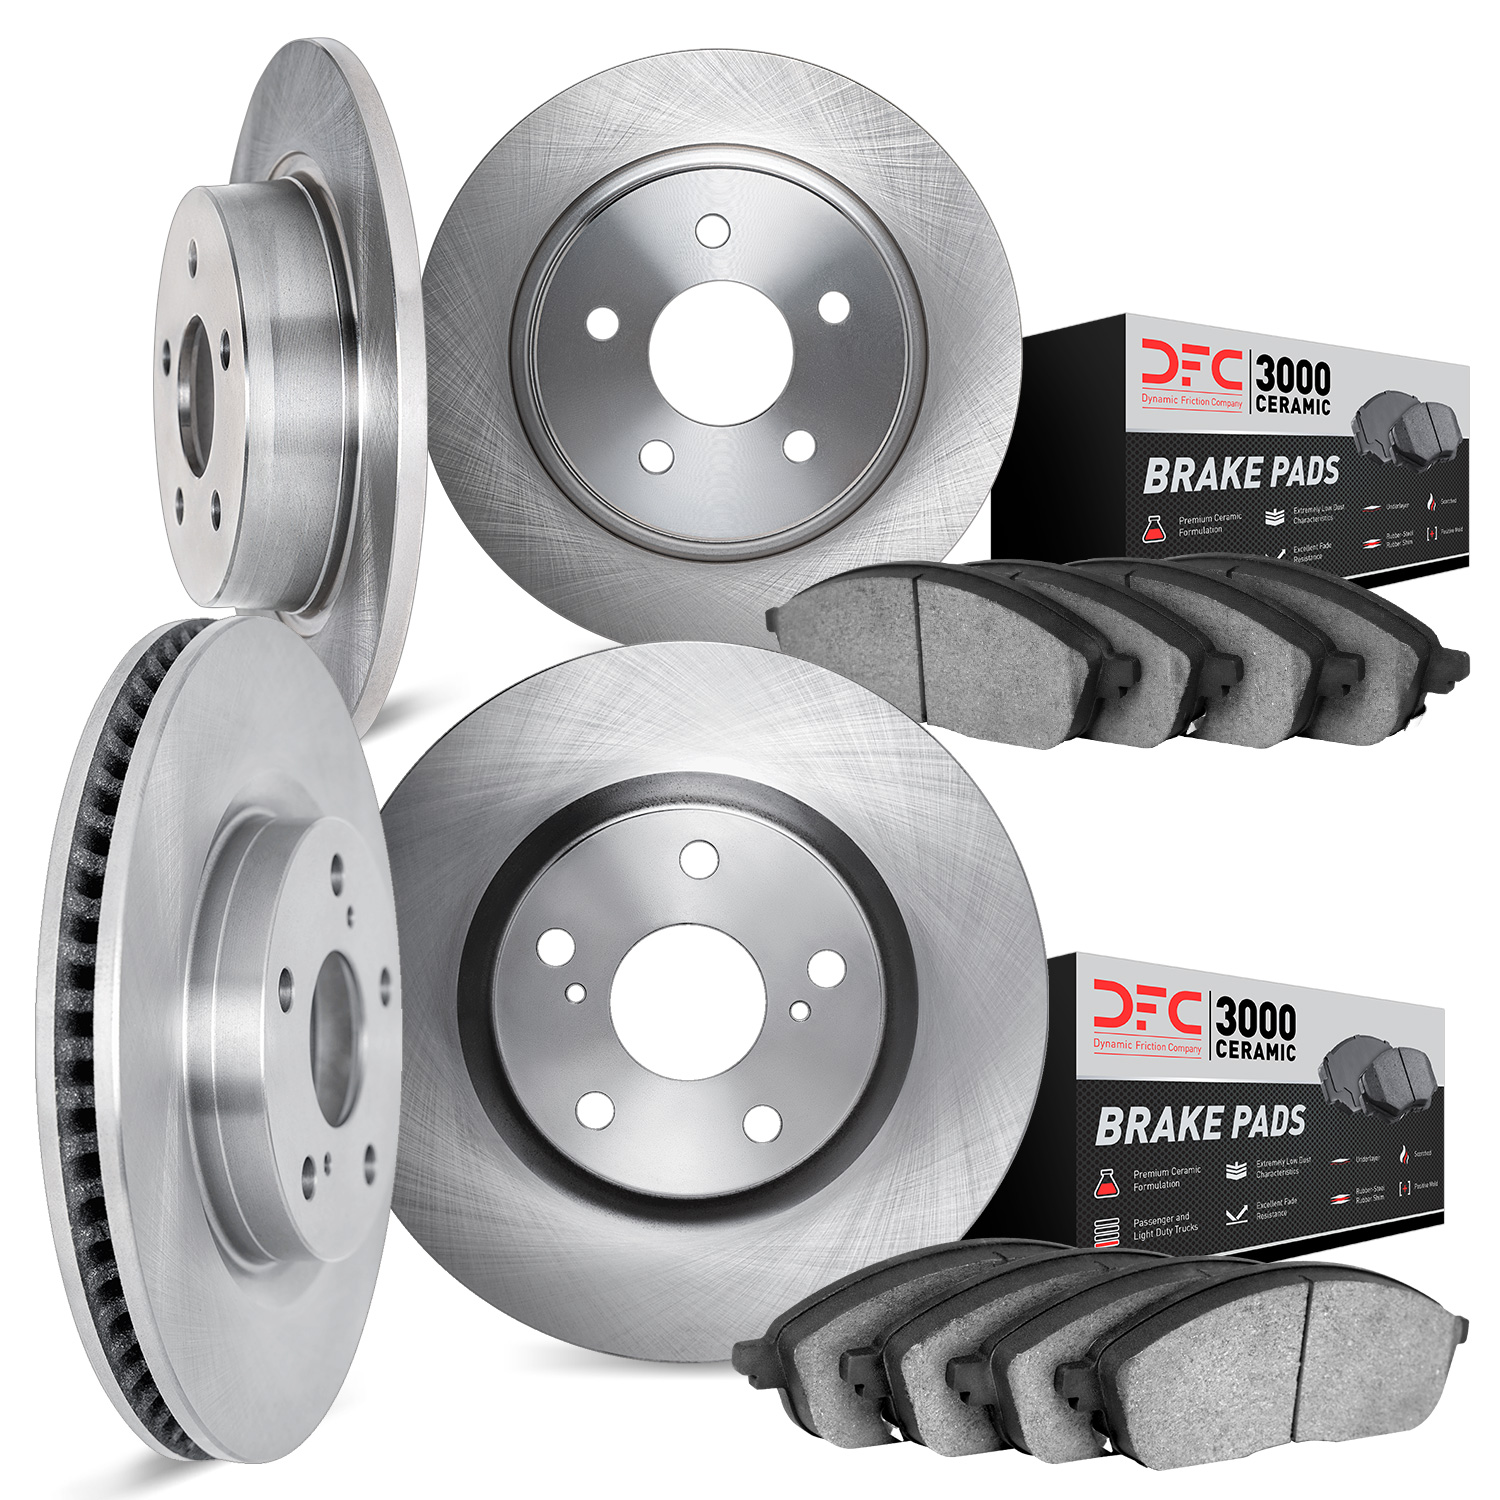 6304-76026 Brake Rotors with 3000-Series Ceramic Brake Pads Kit, 1996-1999 Lexus/Toyota/Scion, Position: Front and Rear